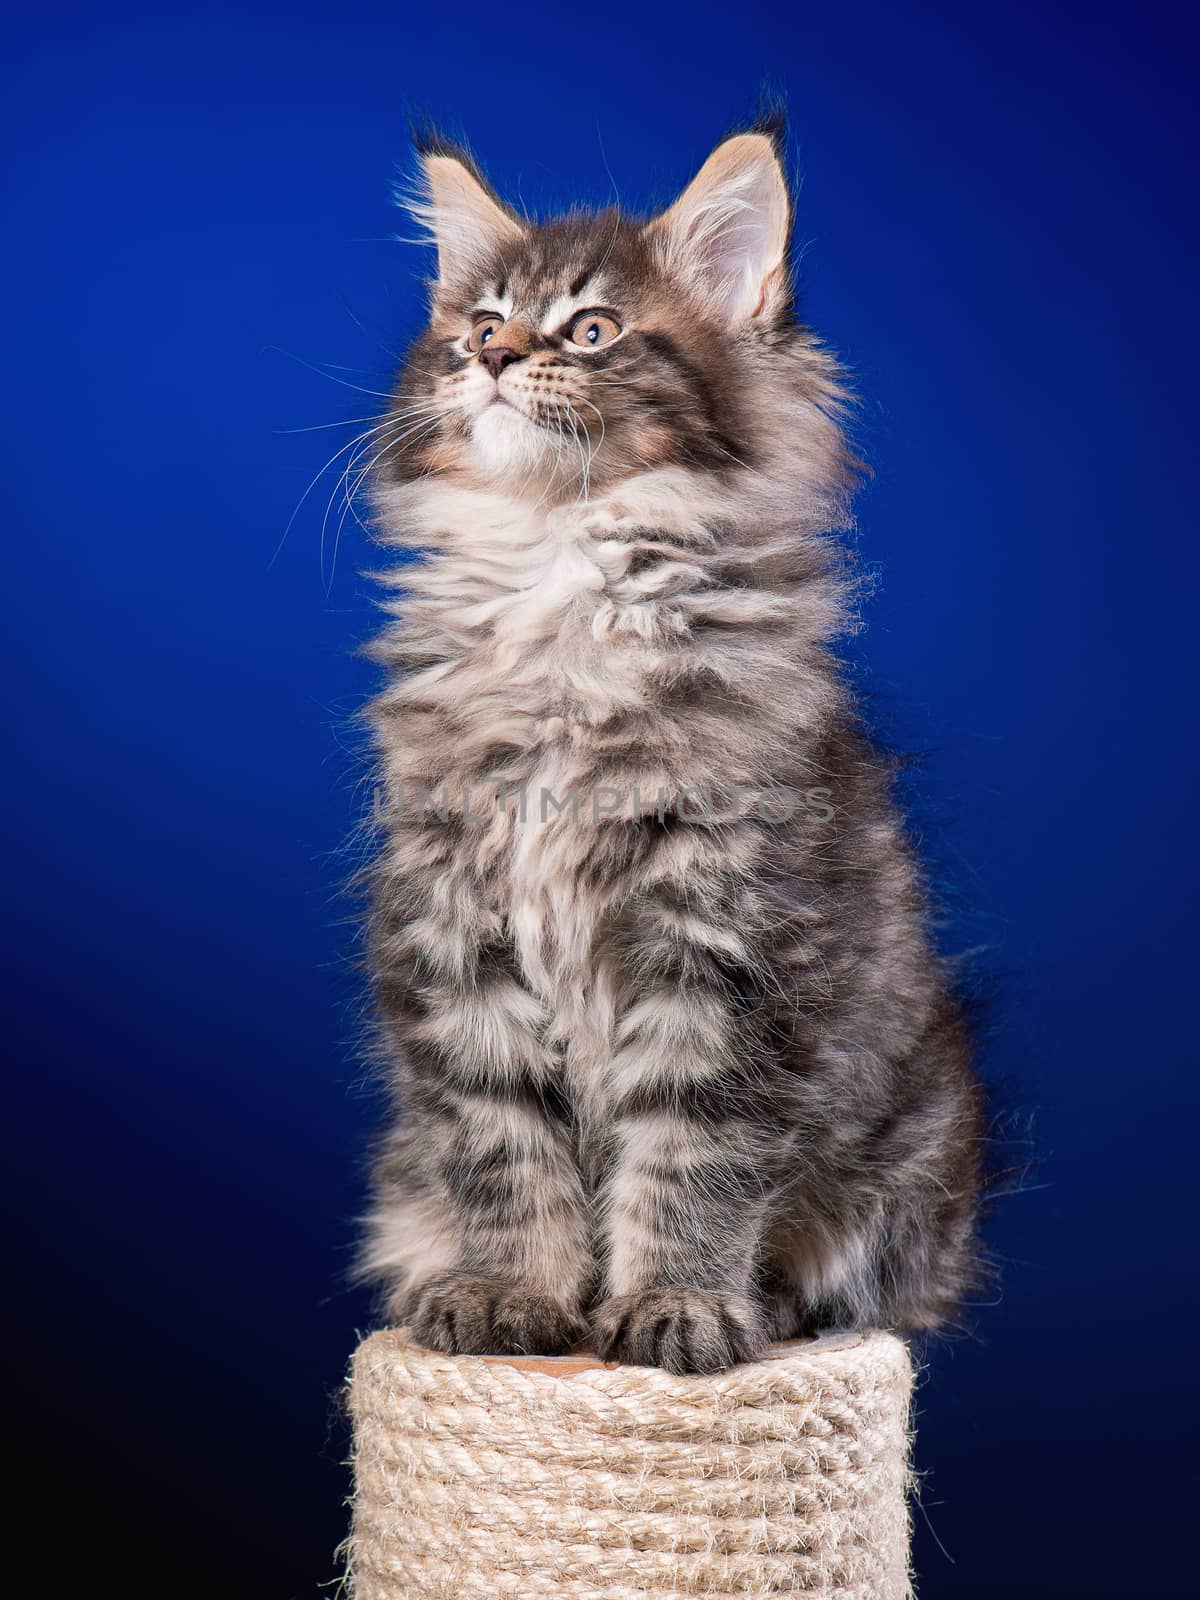 Maine Coon kitten 2 months old sitting on scratching post for cats. Studio photo of beautiful black tabby domestic kitty on blue background.